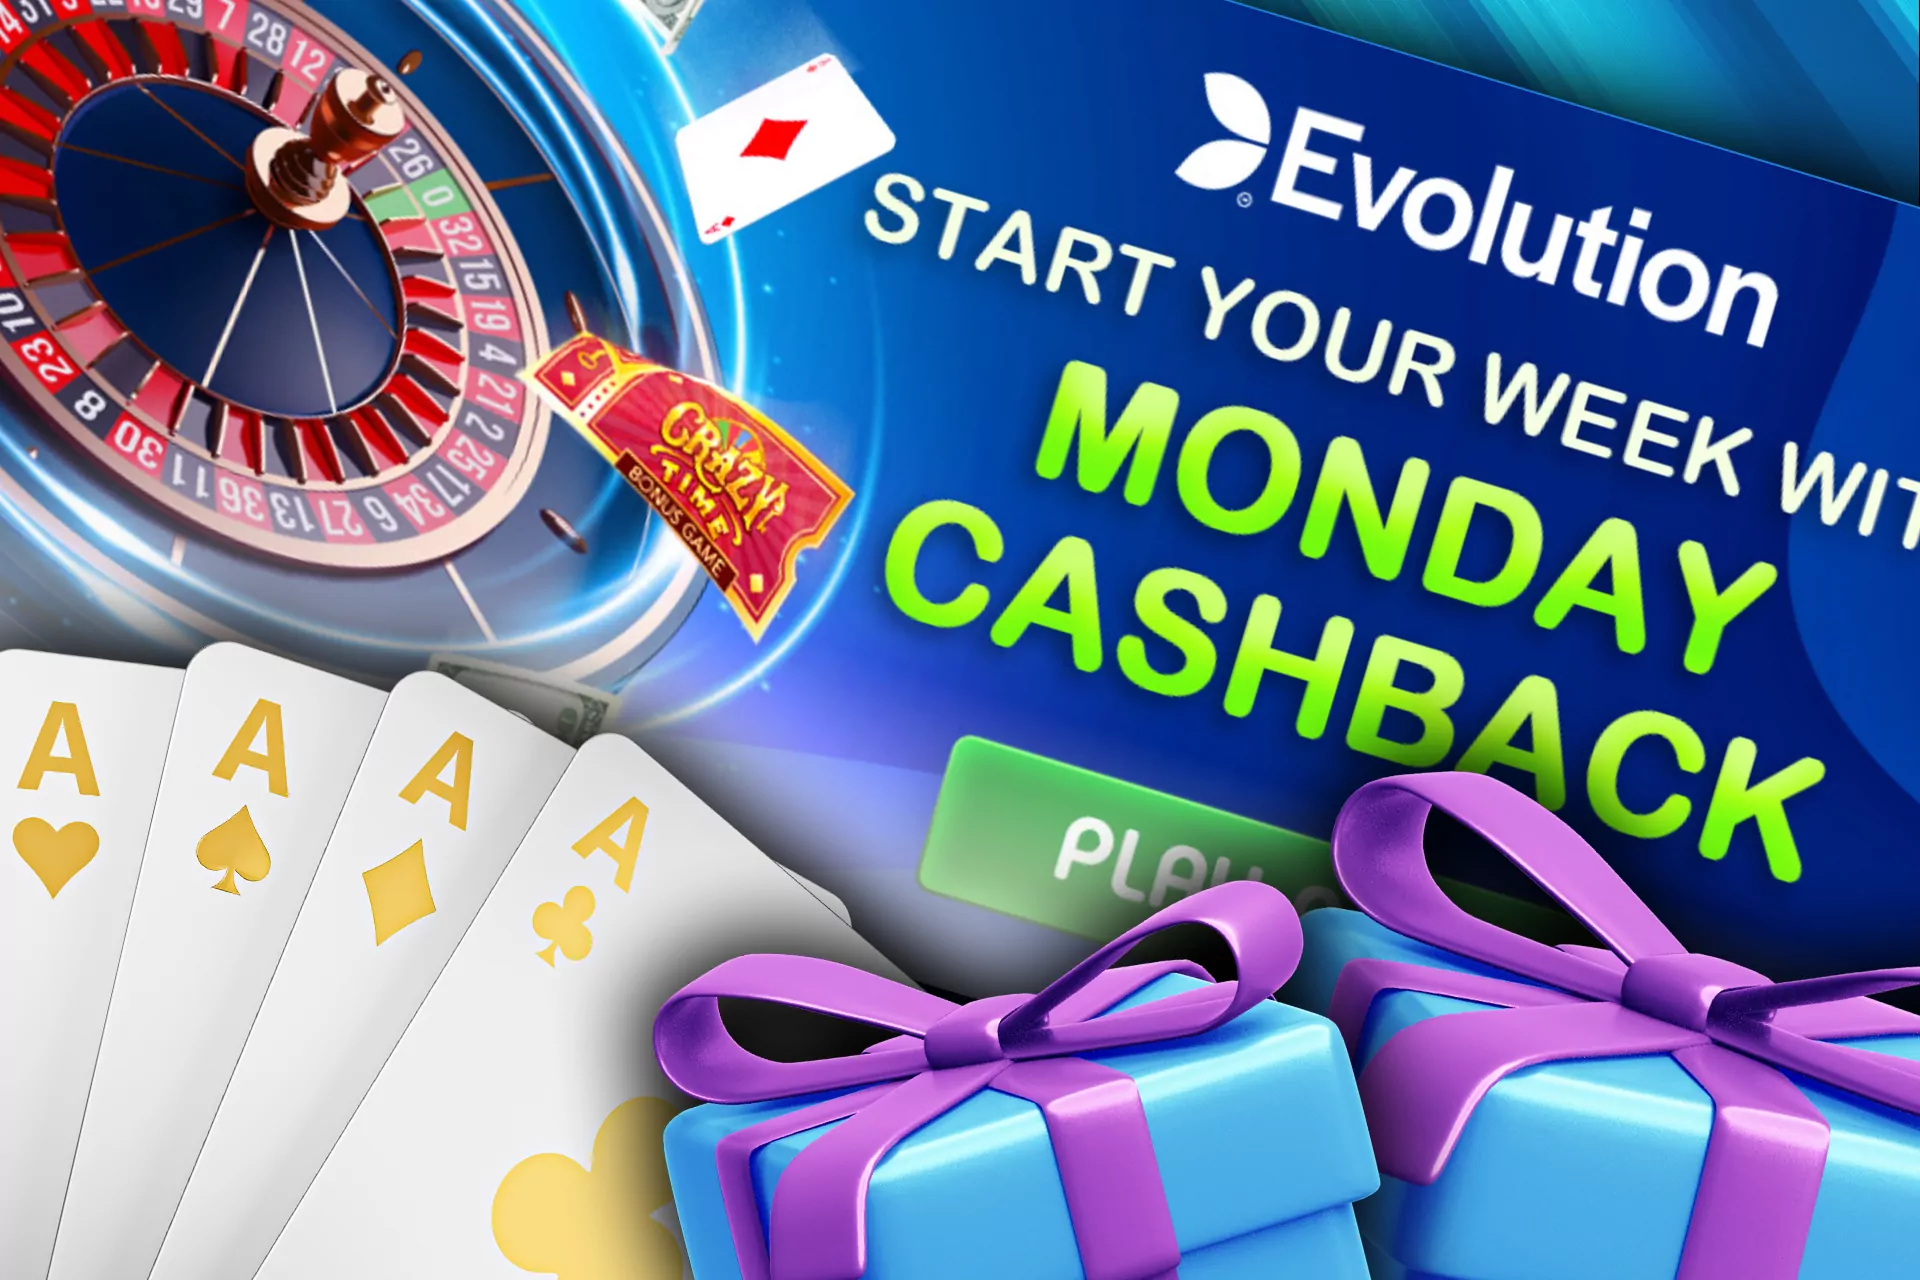 Get a weekly 5% cashback for playing Evolution slots.